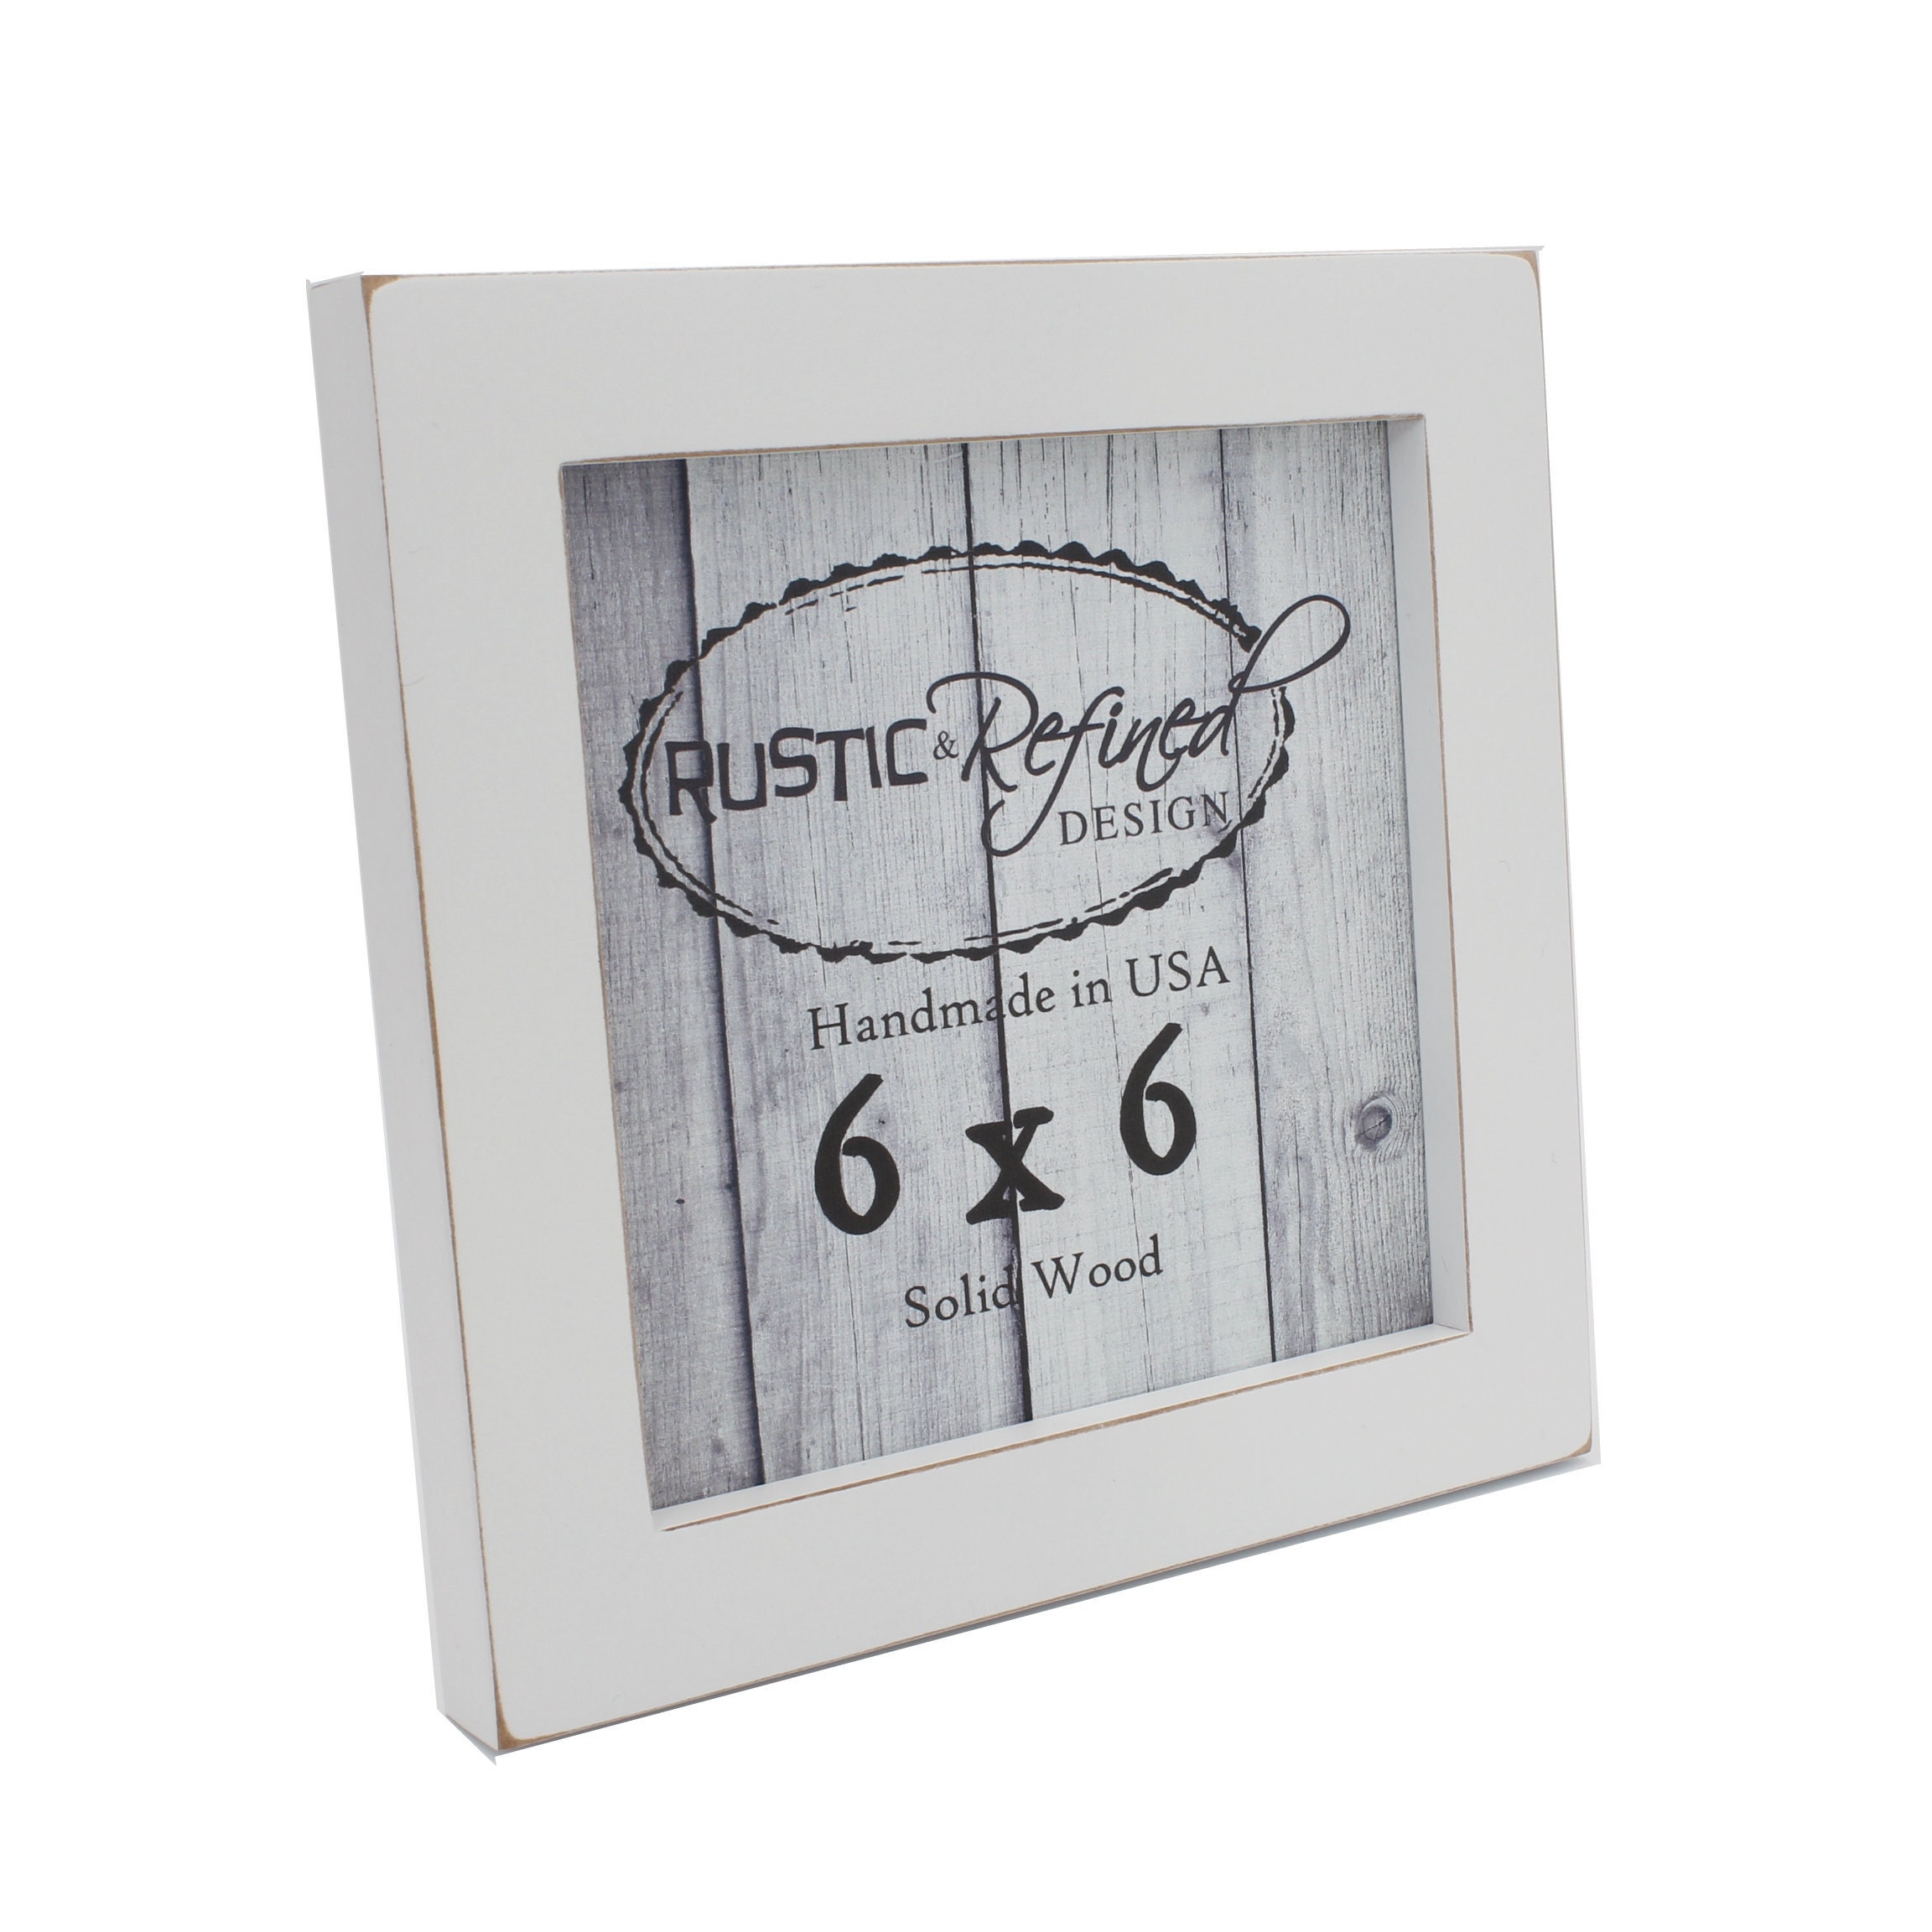 Multi Aperture Photo Frame. Holds Nine 6x6 Photos. 60x60cm. Wooden Collage  Photo Frame. Handmade by Arthome. 